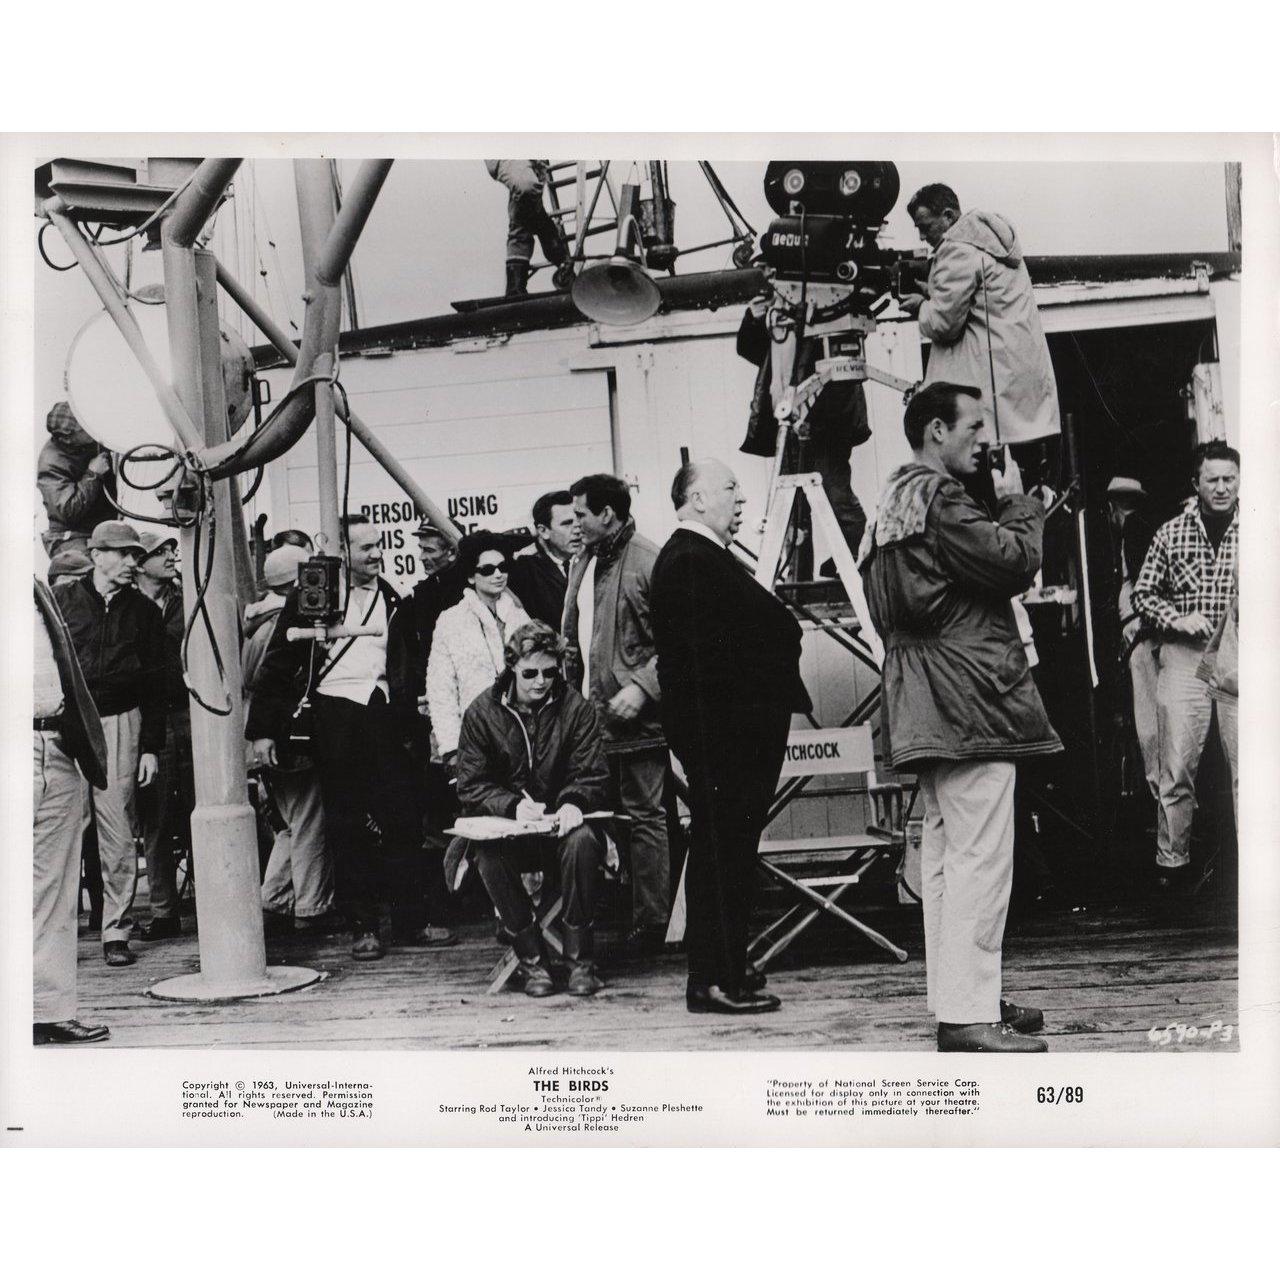 Original 1963 U.S. silver gelatin single-weight photo for the film The Birds directed by Alfred Hitchcock with Tippi Hedren / Suzanne Pleshette / Rod Taylor / Jessica Tandy. Very good condition. Please note: the size is stated in inches and the